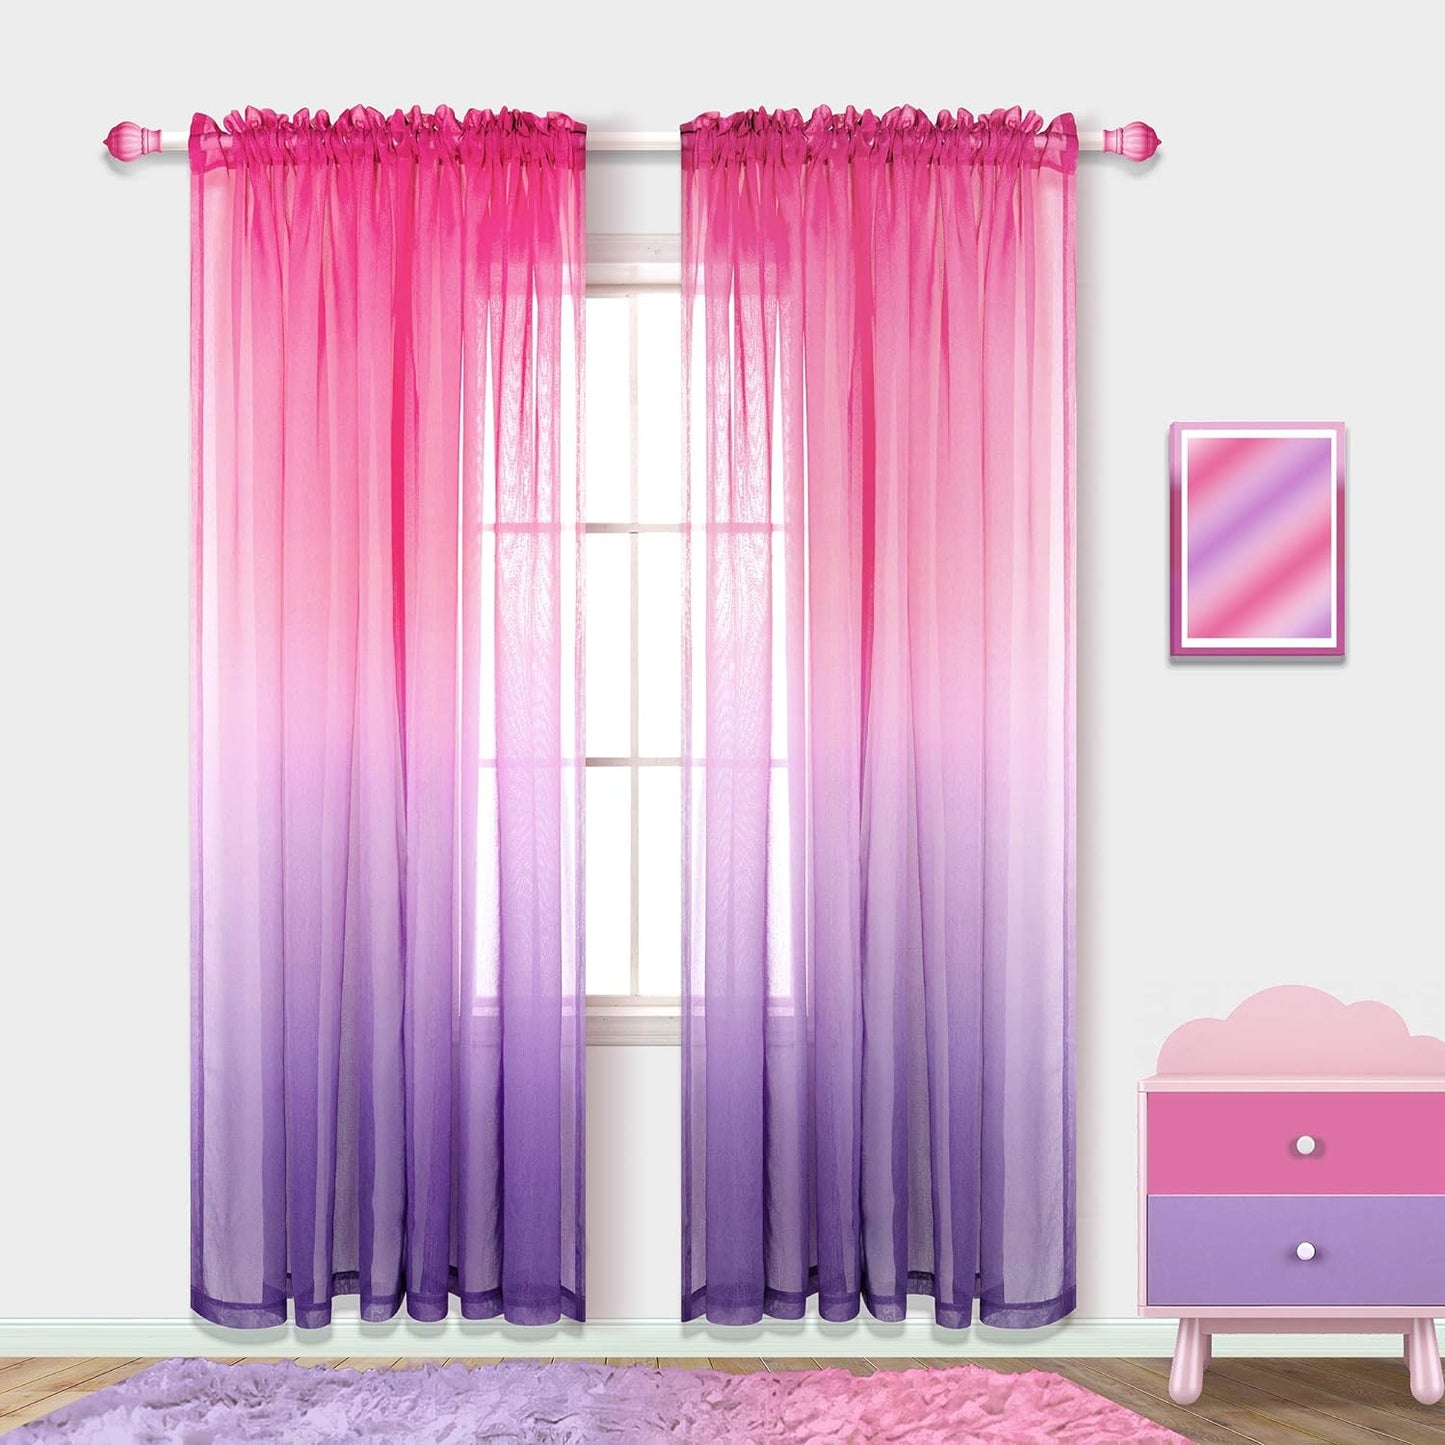 Spring Sheer Curtains for Living Room with Rod Pocket Window Treatments Decor 84 Inch Length Bedroom Curtain Set of 2 Panels Yellow and Grey Gray  PITALK TEXTILE Pink And Purple 52X84 